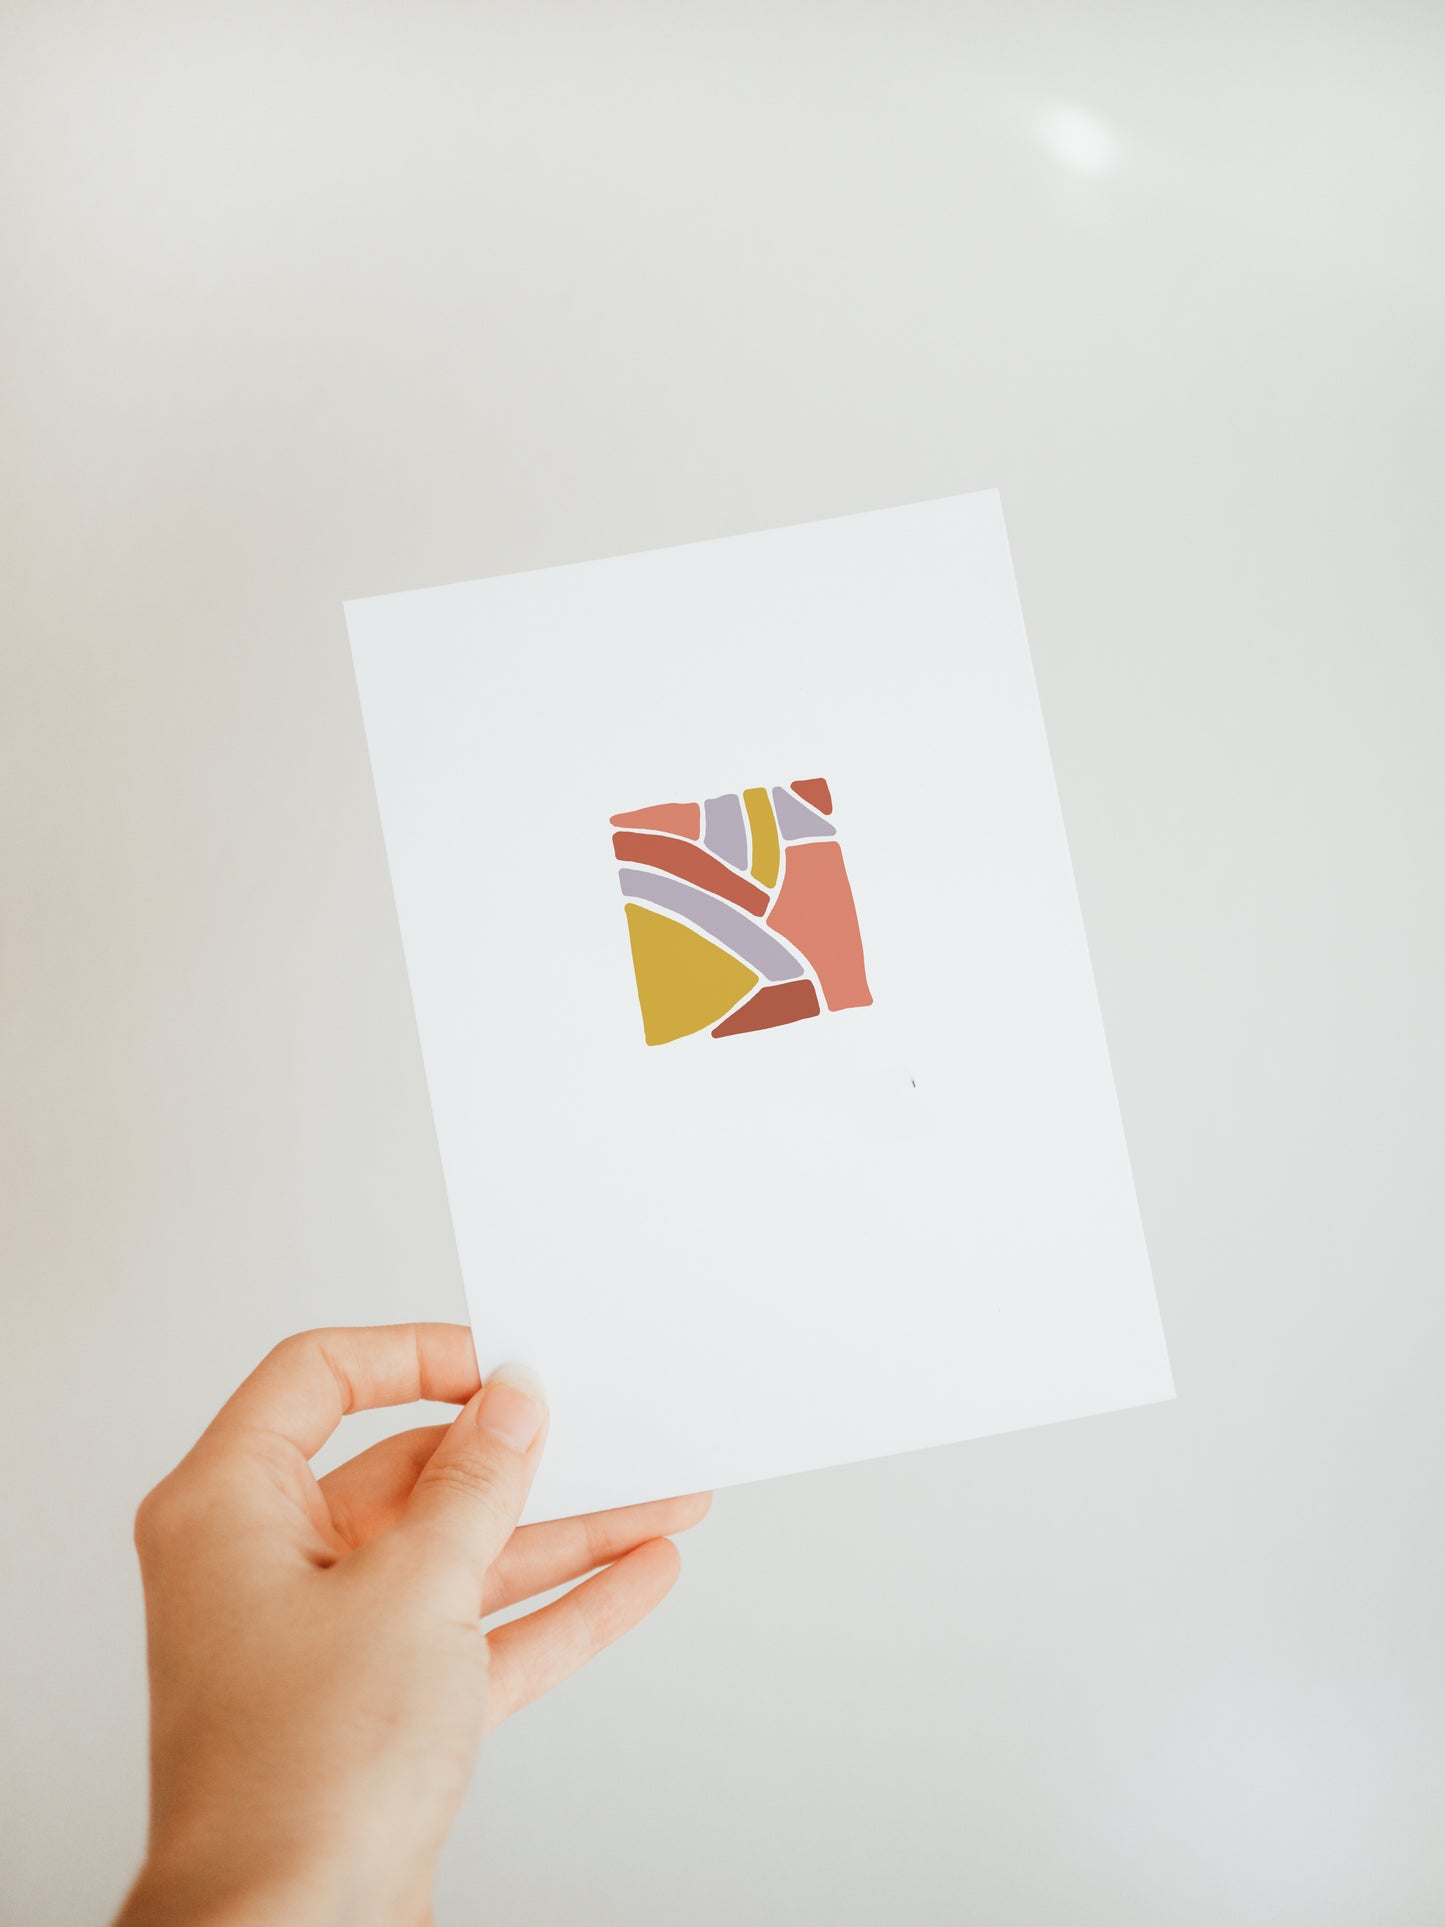 hand holding a white greeting card with a square design in the center made up of abstract shapes in muted yellow, salmon, brick, and lavender tones